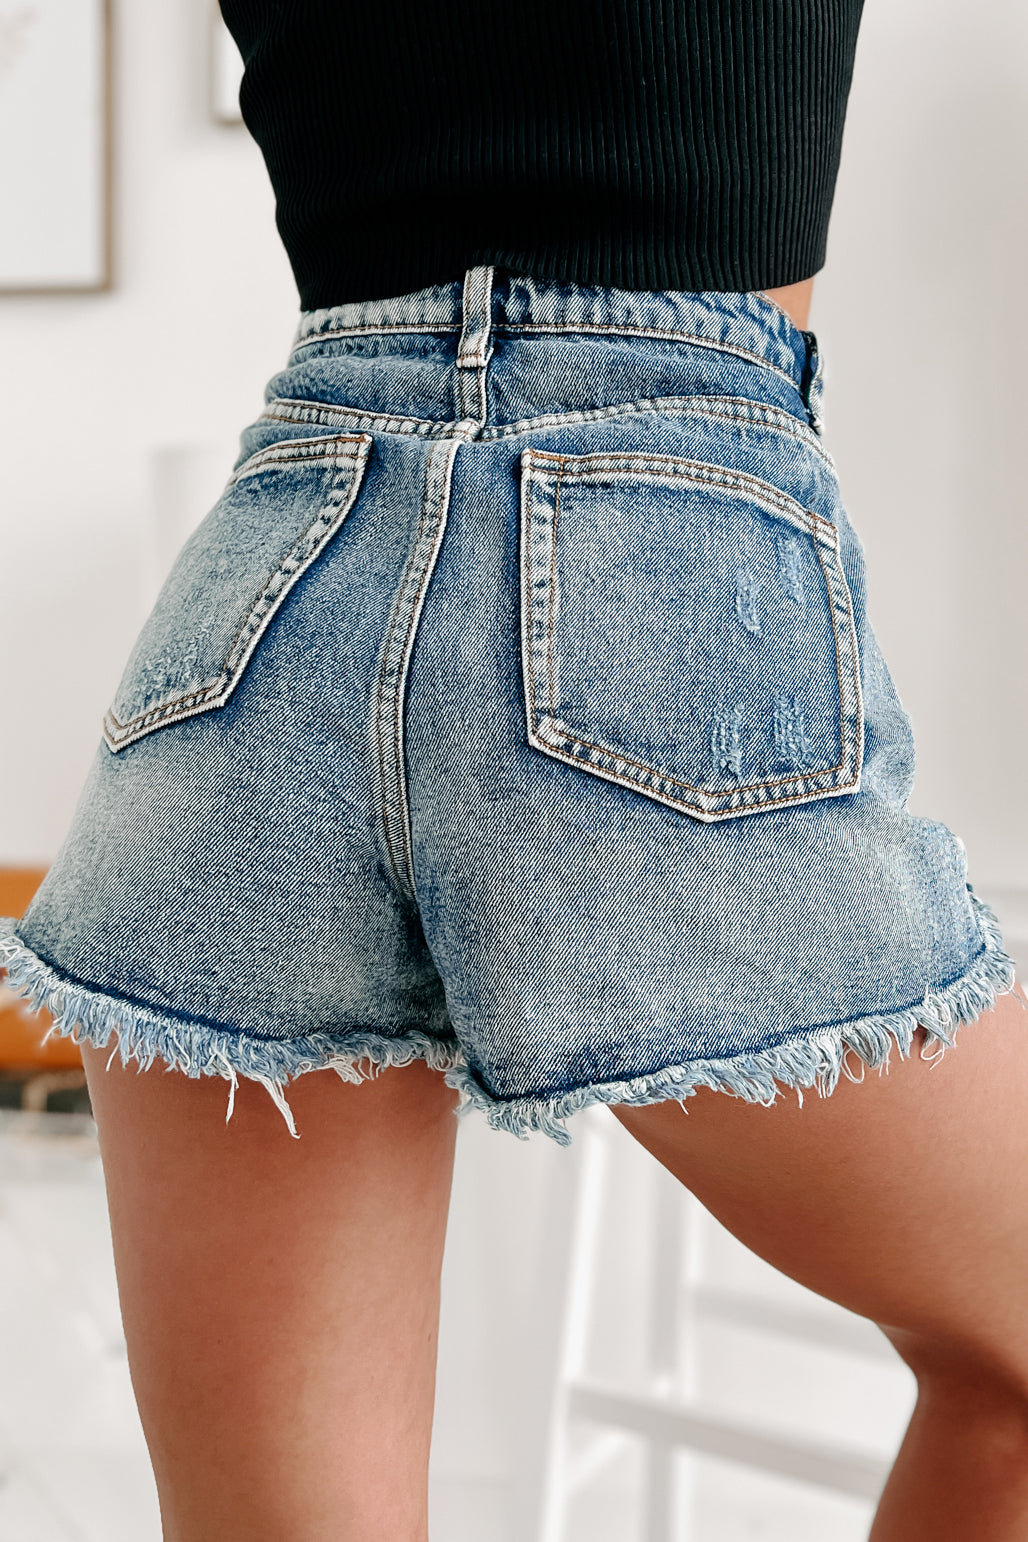 My Favorite Denim Shorts for Mid-Size Girls - Thrifty Pineapple